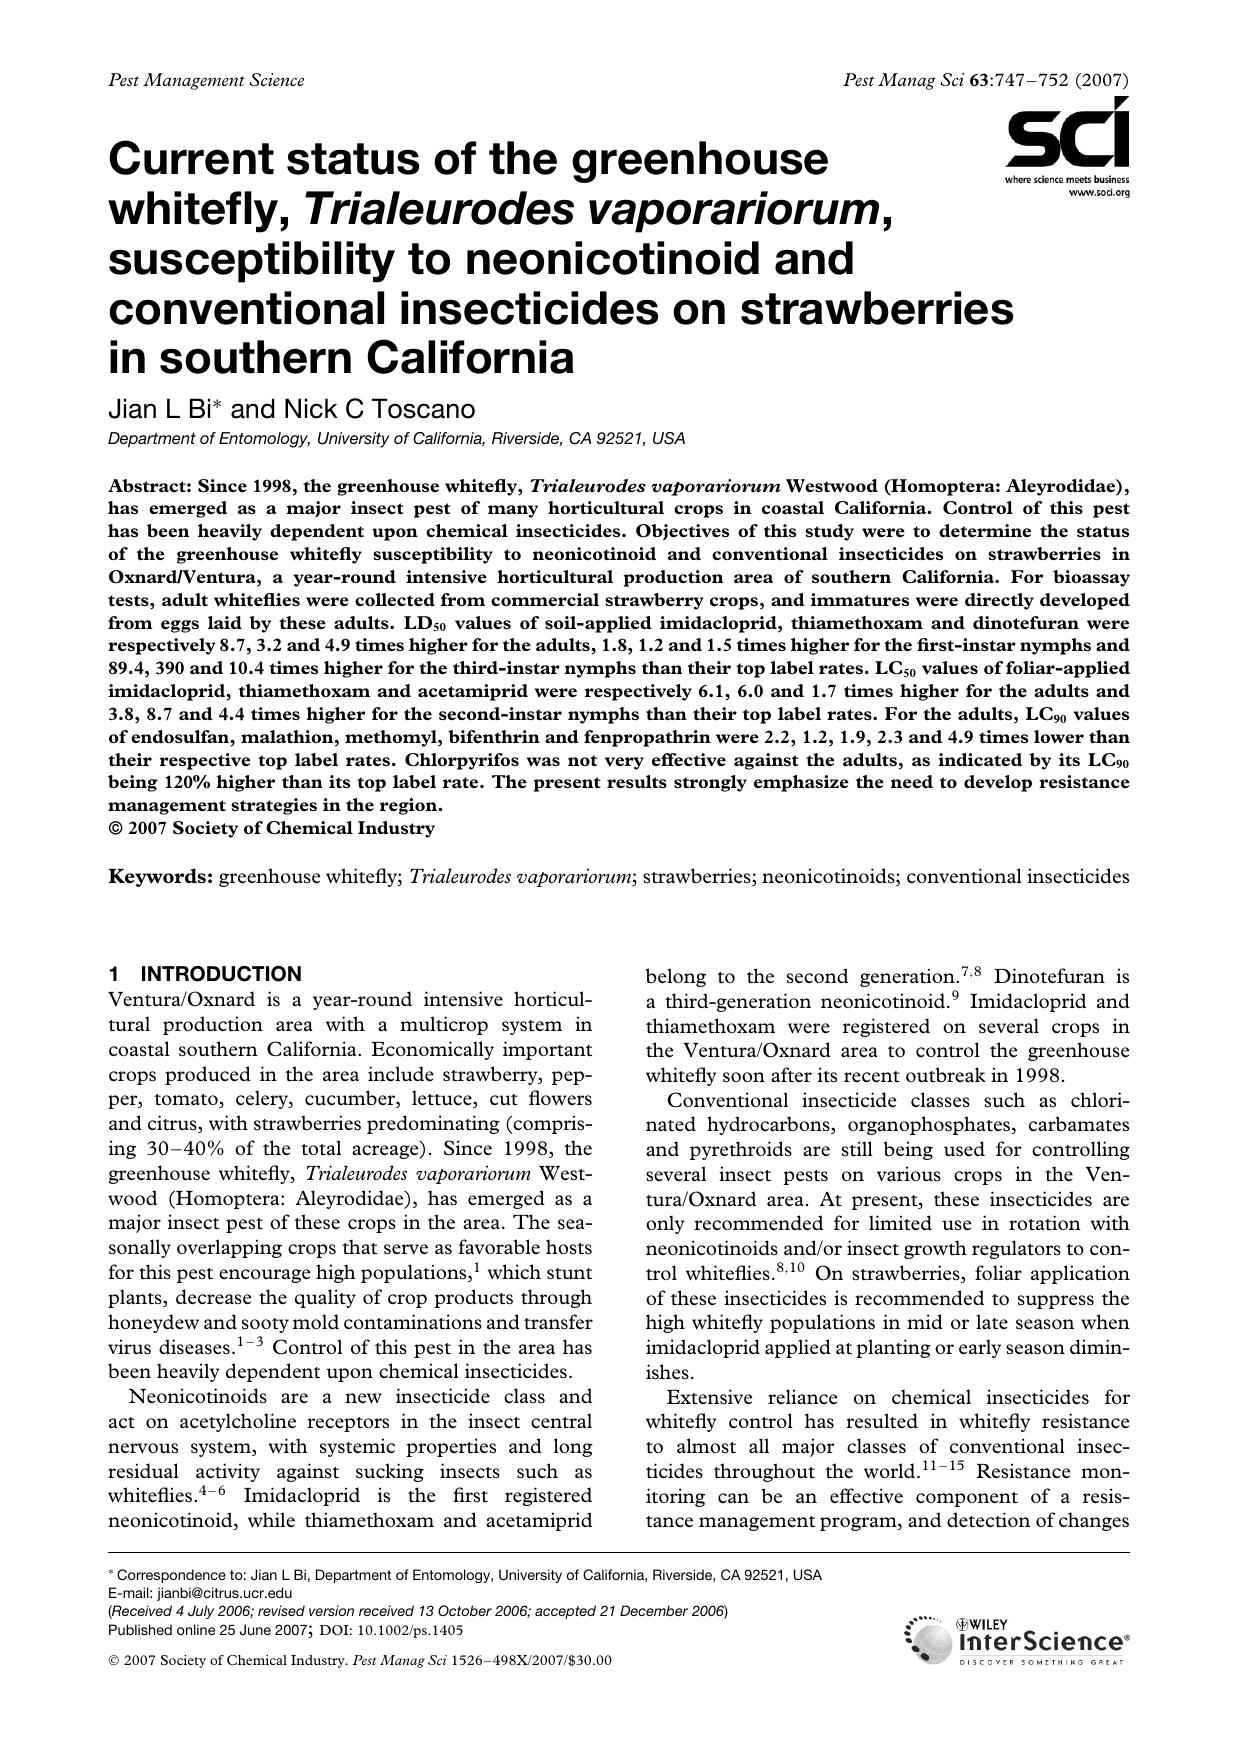 Current status of the greenhouse whitefly, Trialeurodes vaporariorum, susceptibility to neonicotinoid and conventional insecticides on strawberries in southern California by Unknown